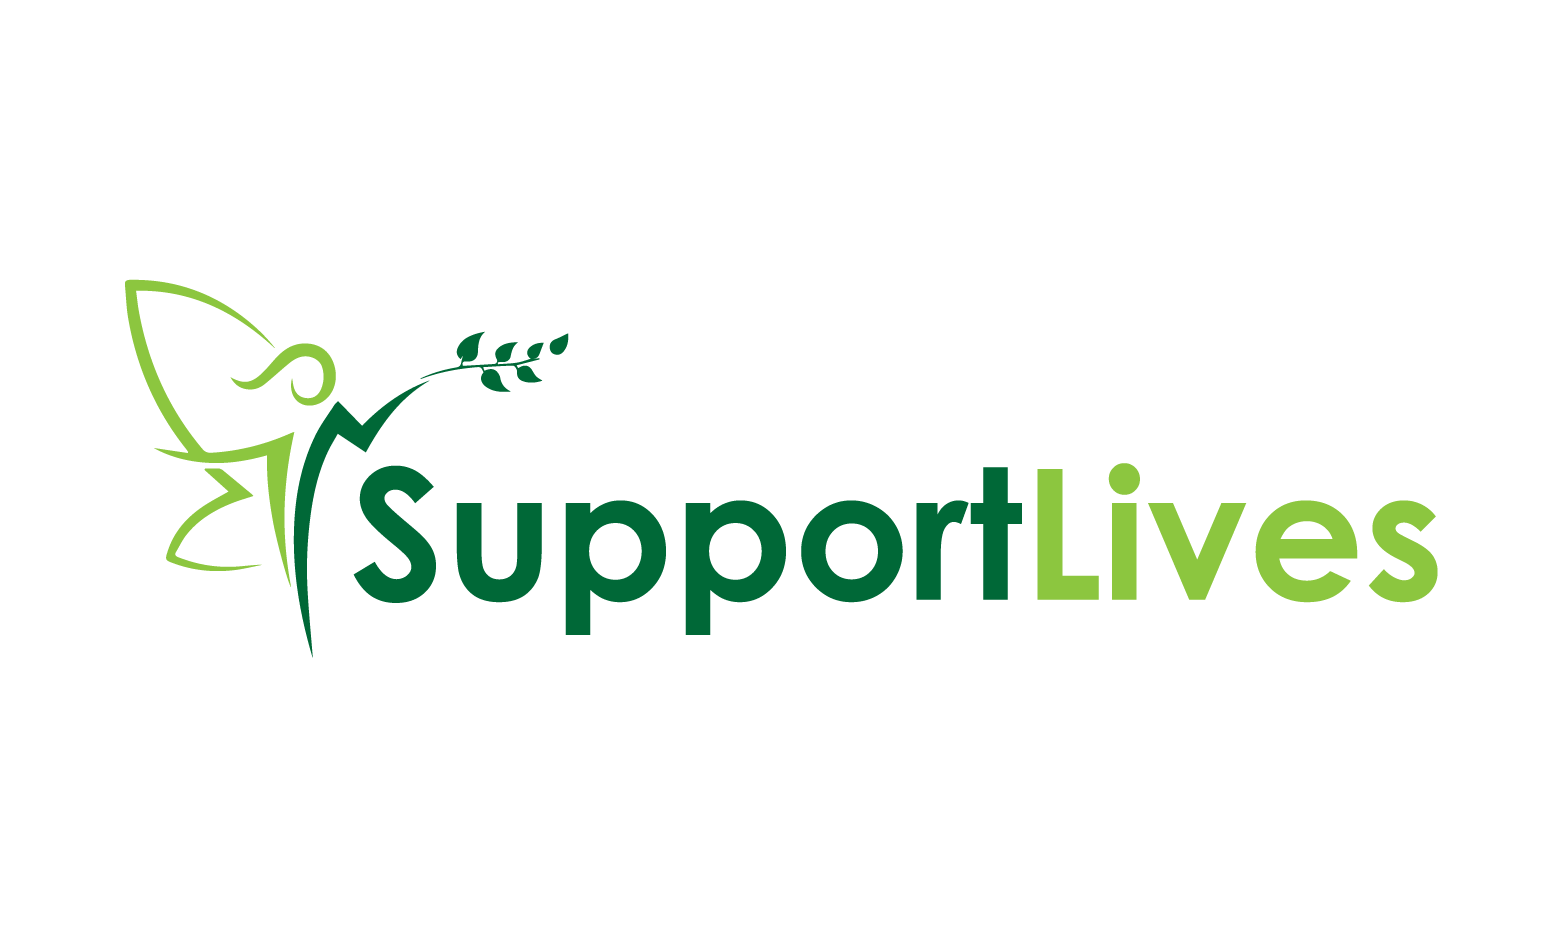 SupportLives.com - Creative brandable domain for sale